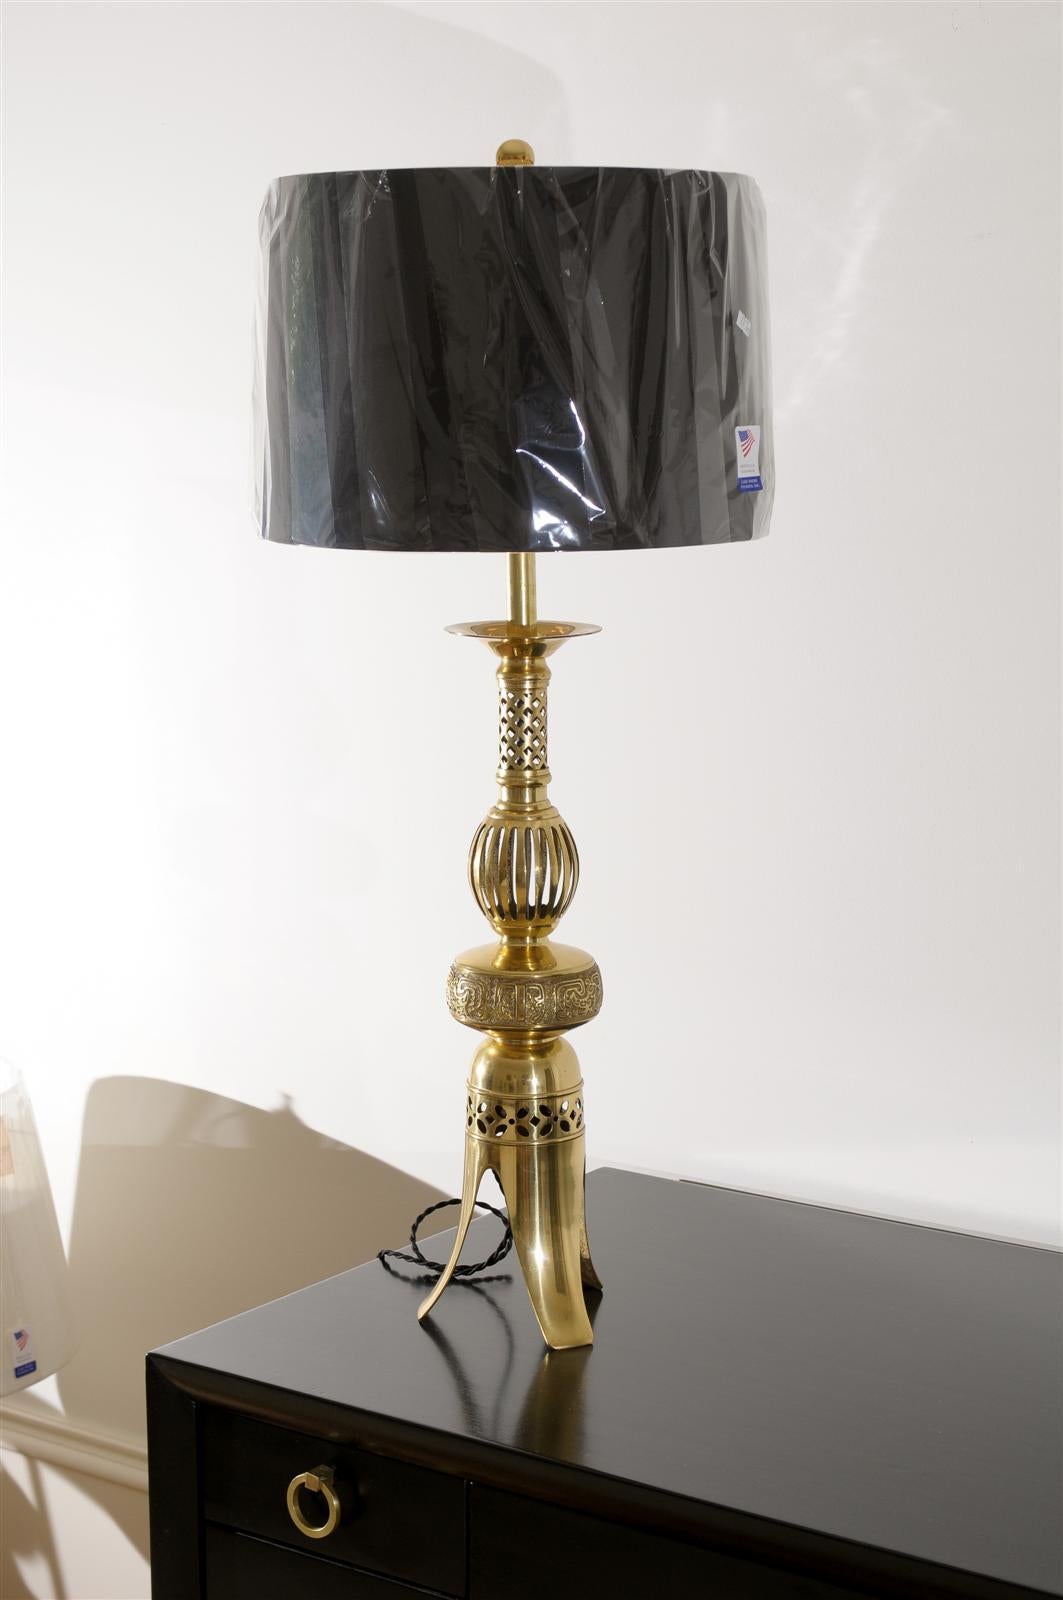 An exceptional pair of large-scale lamps, circa 1960. Solid brass with a sophisticated Asian feel. Beautiful scale and detail, with fabulous patina. Exquisite jewelry! Excellent Restored Condition, rewired with black silk braded cord. Complete with